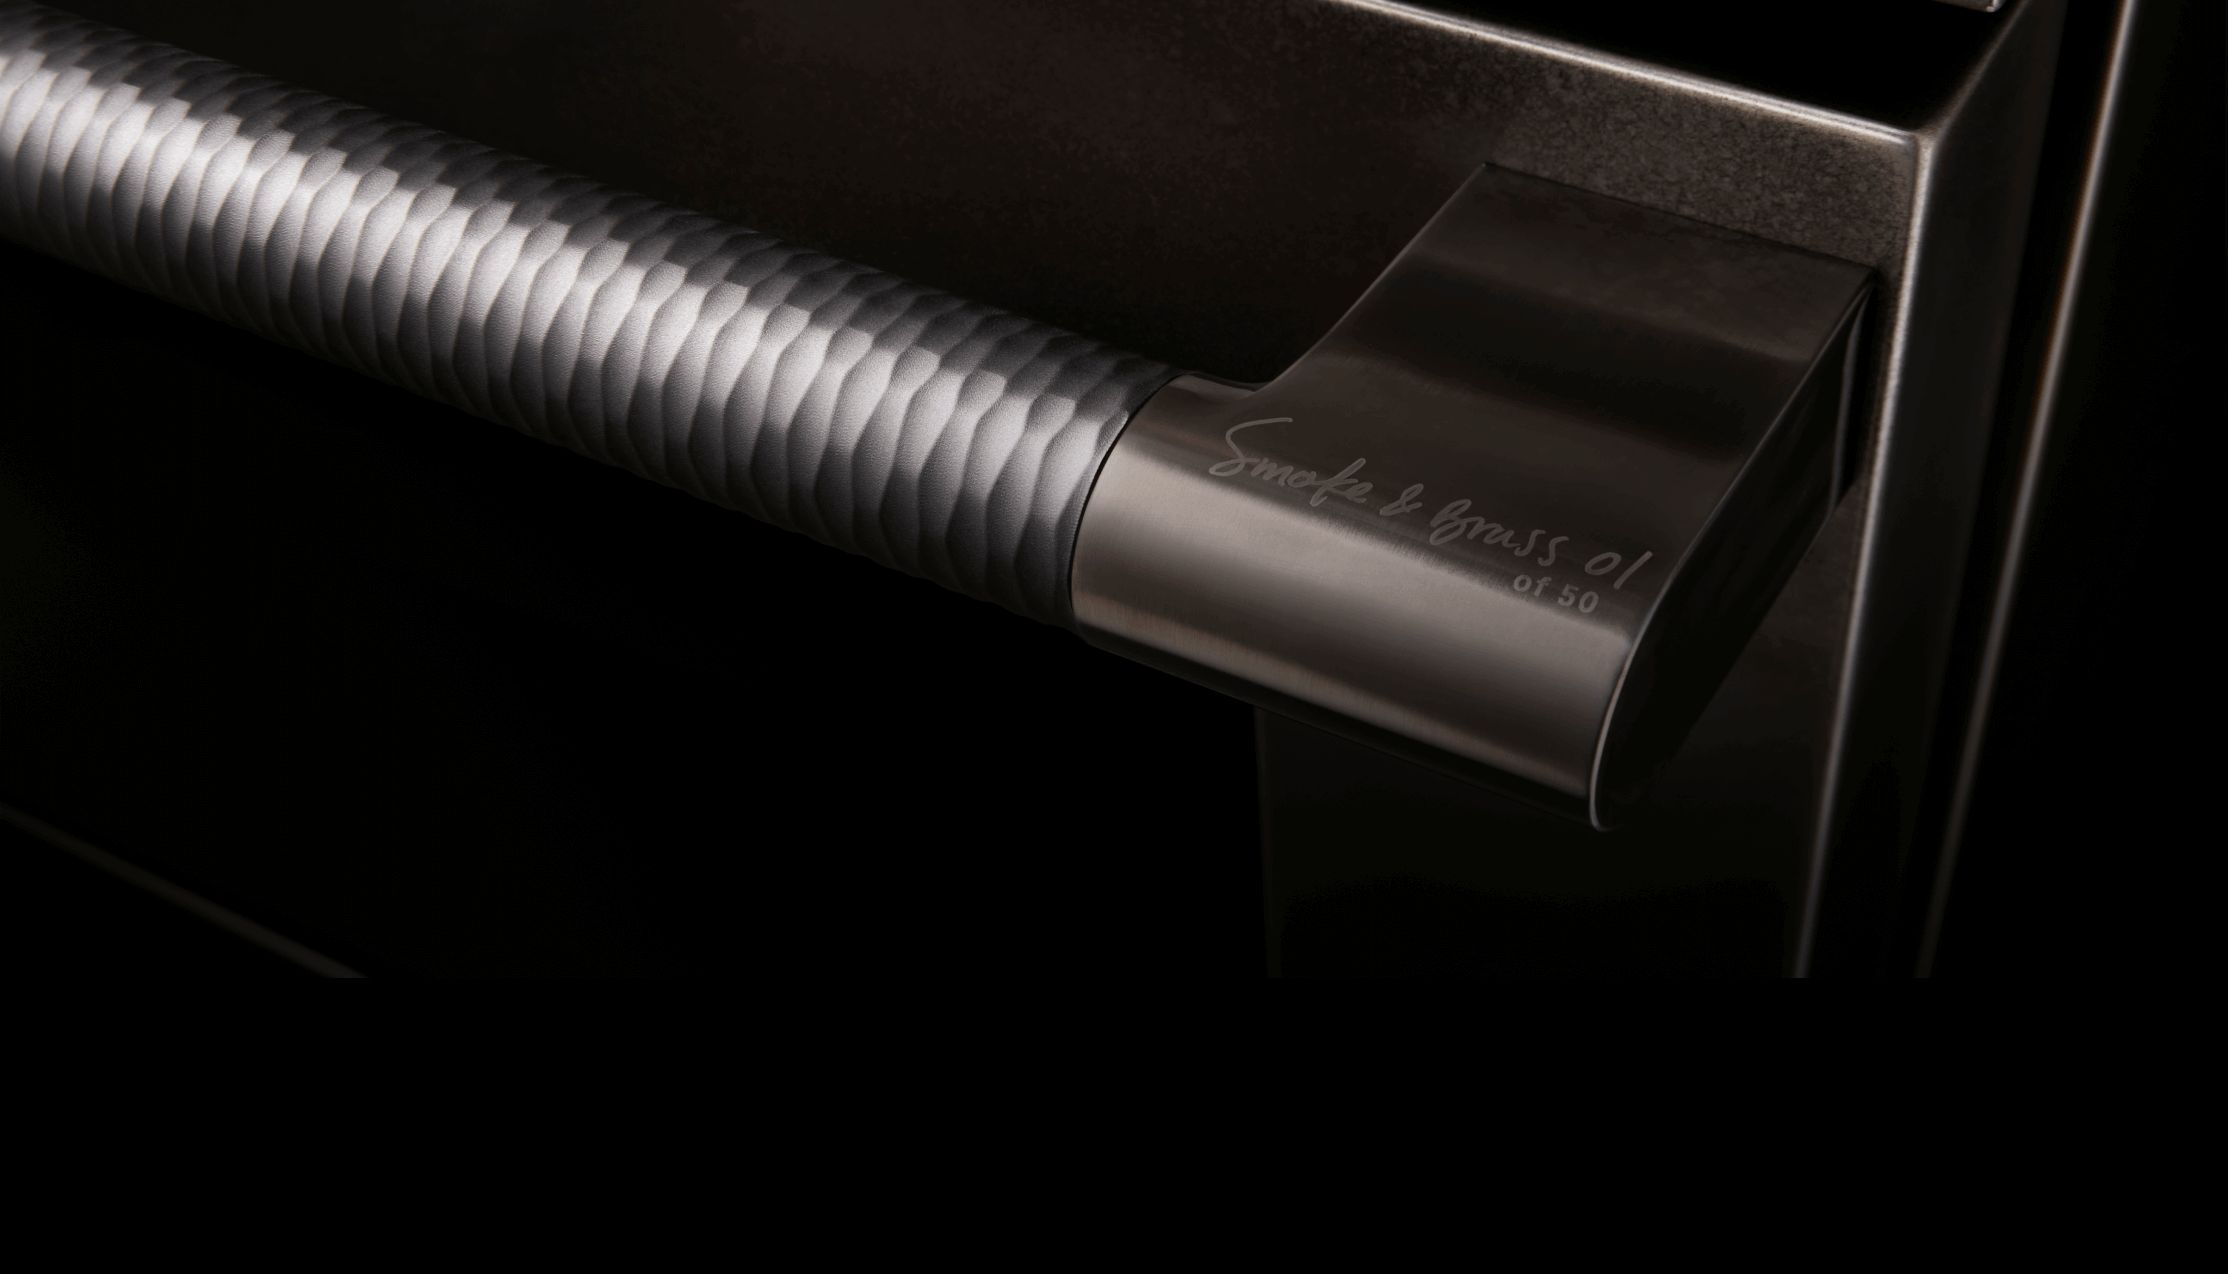 The numbered etching on the handle standoff of the Smoke & Brass range.